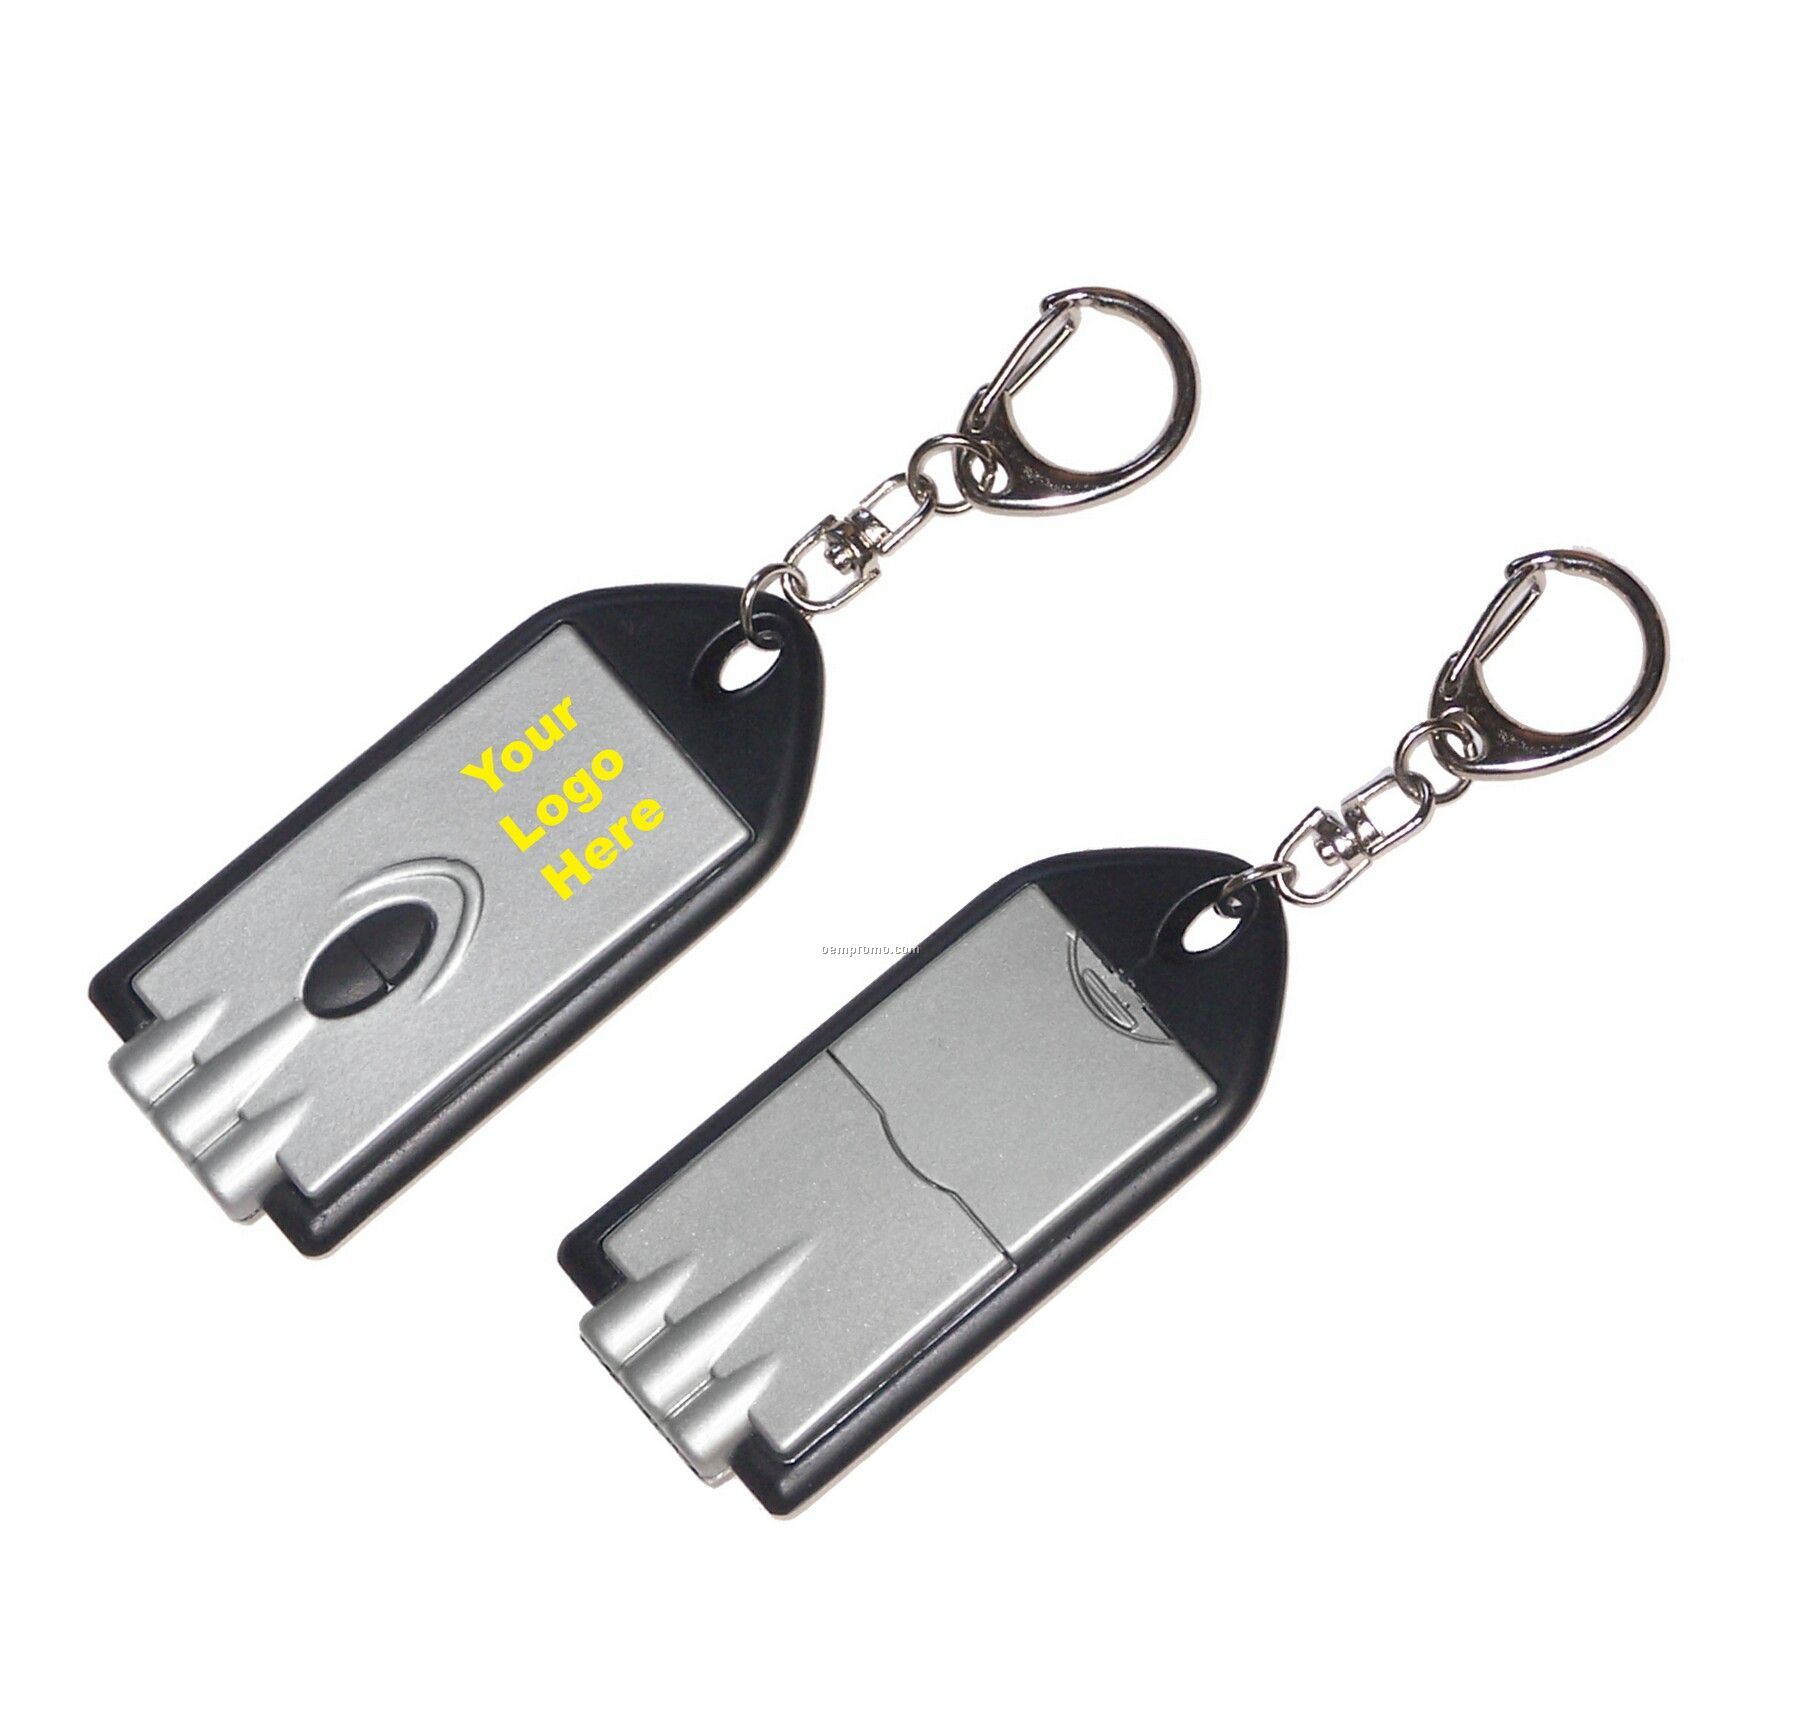 Laser Pointer And LED Dual Function Keychain